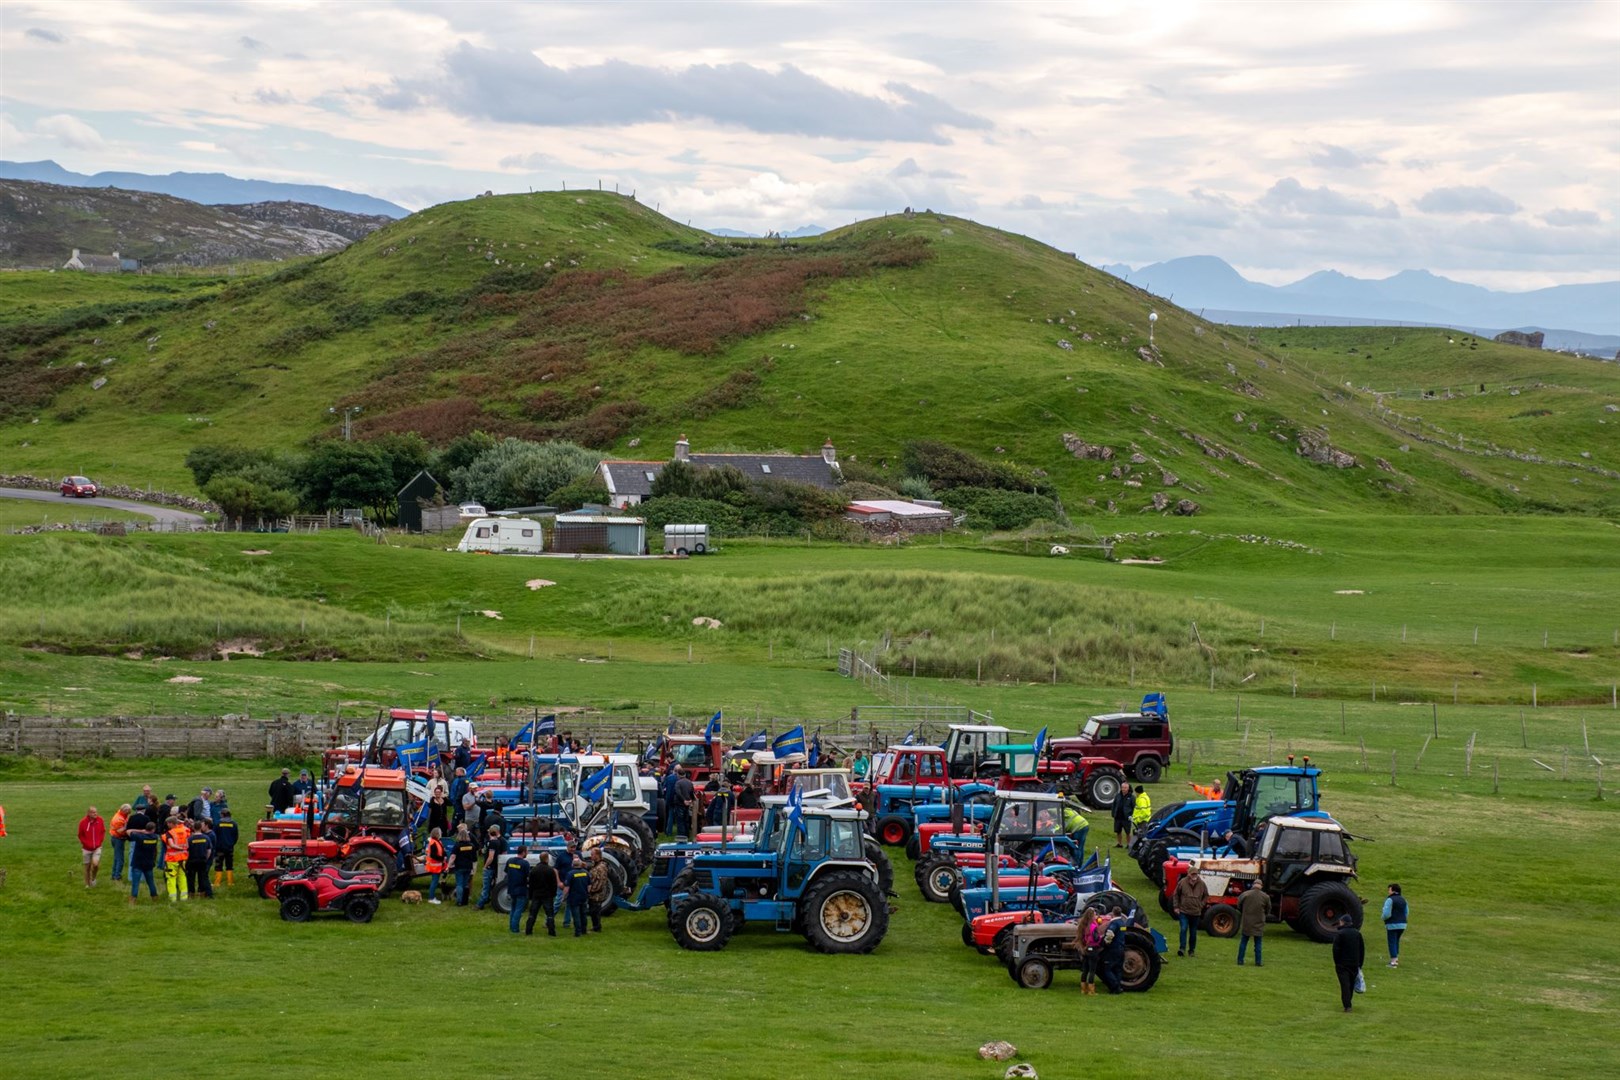 The tractors grouped together. Picture: Sean Mackay